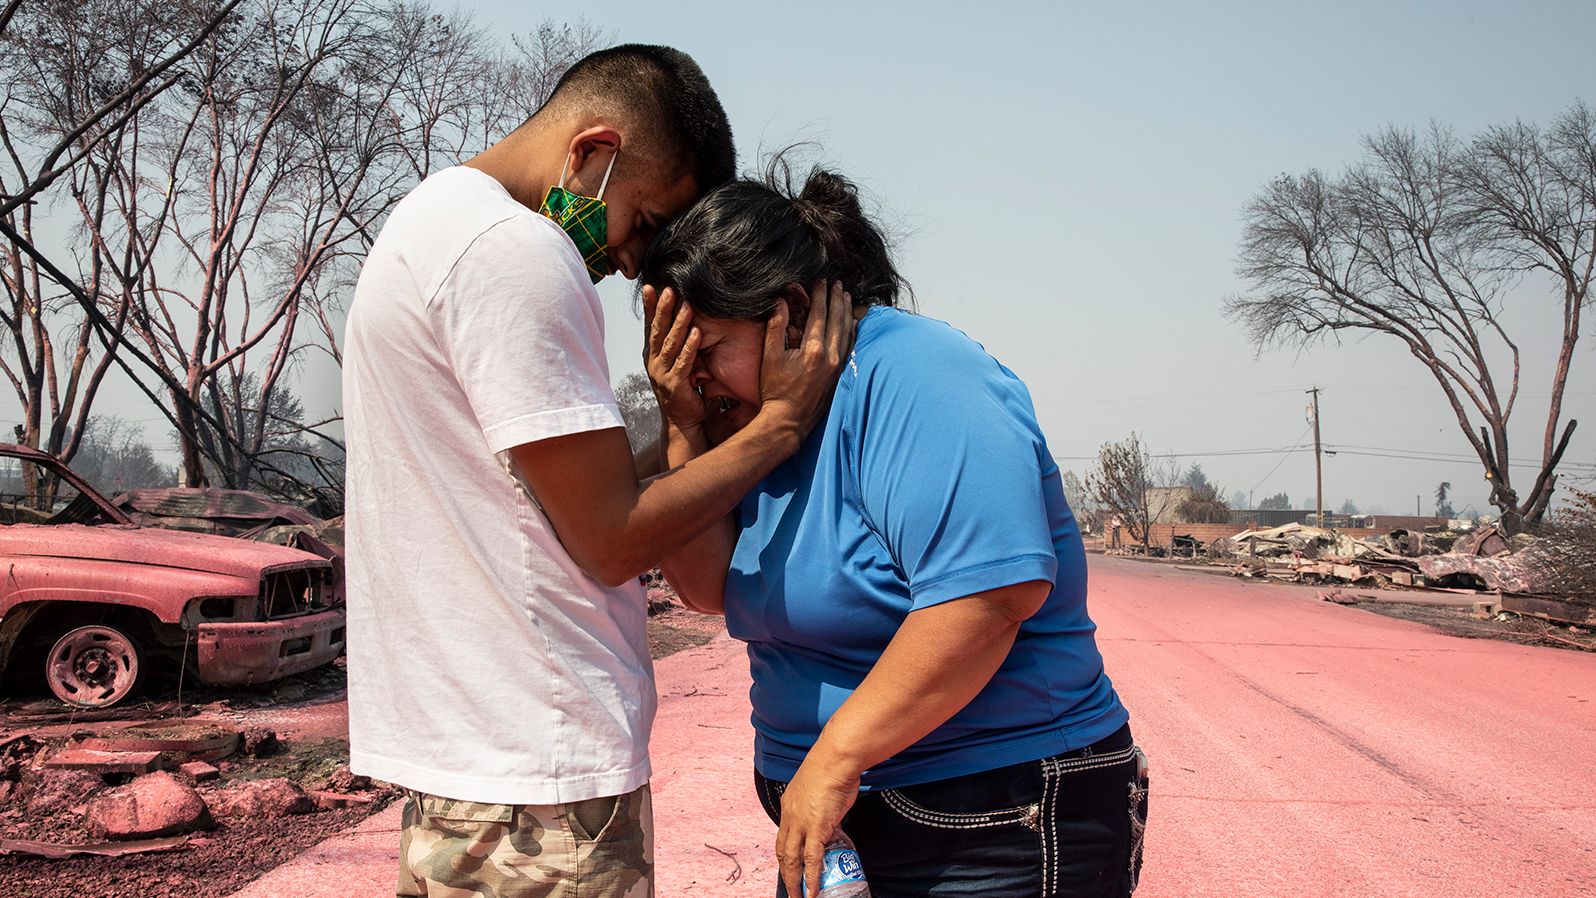 Dora Negrete is consoled by her son Hector Rocha after seeing their destroyed mobile home in Talent, Oregon, on September 10, 2020.